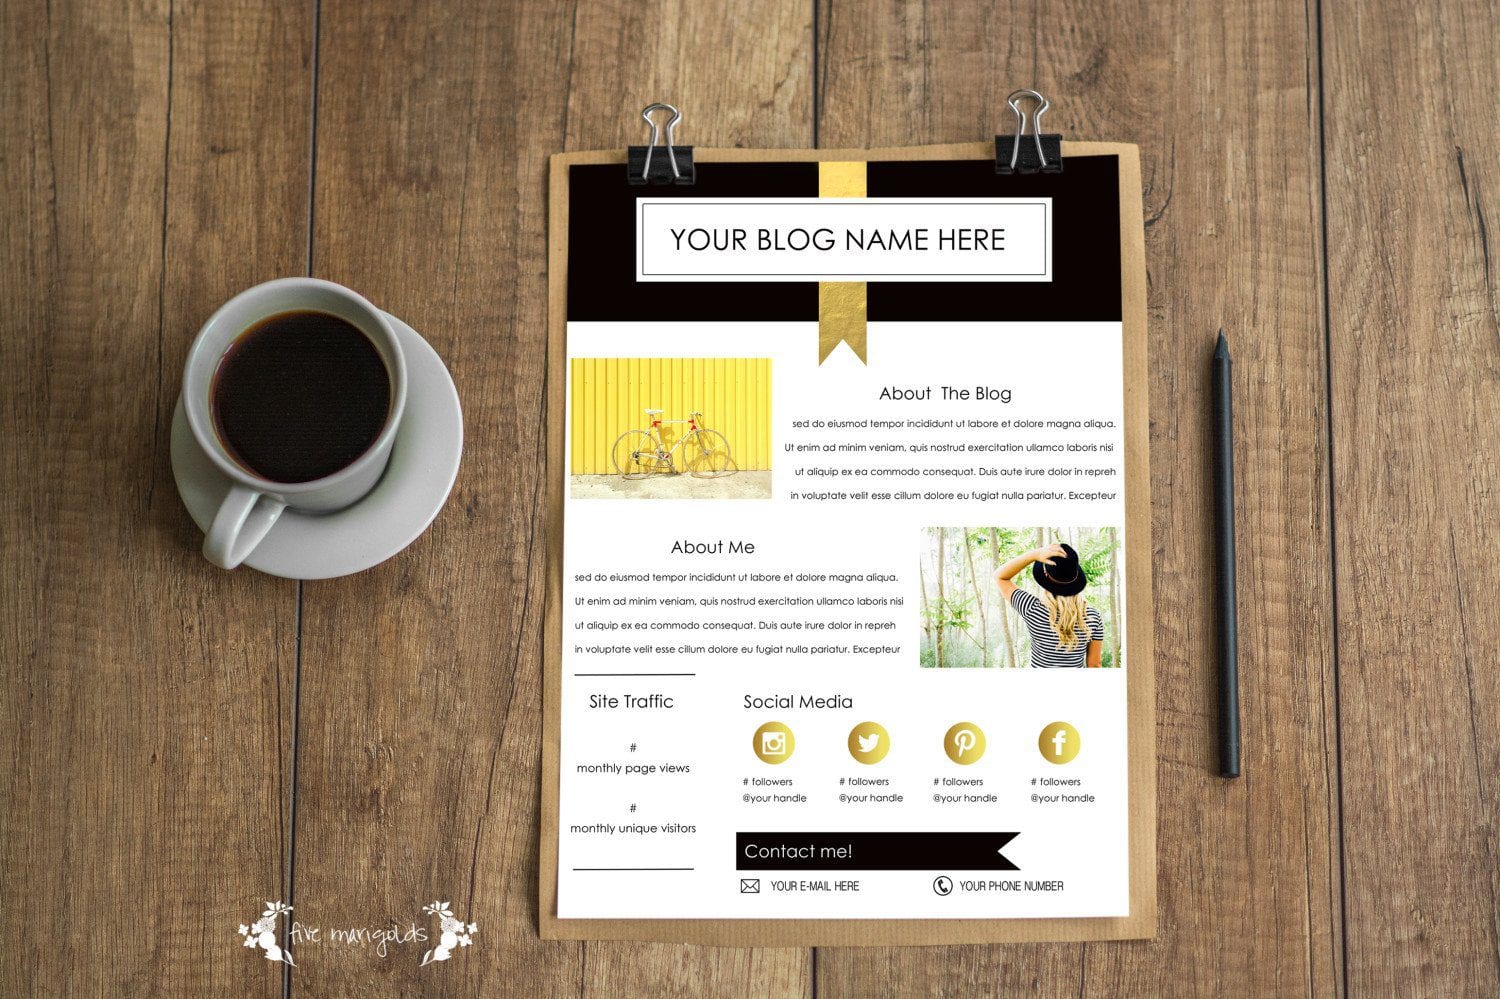 Free Media Kit Template for Bloggers | www.fivemarigolds.com